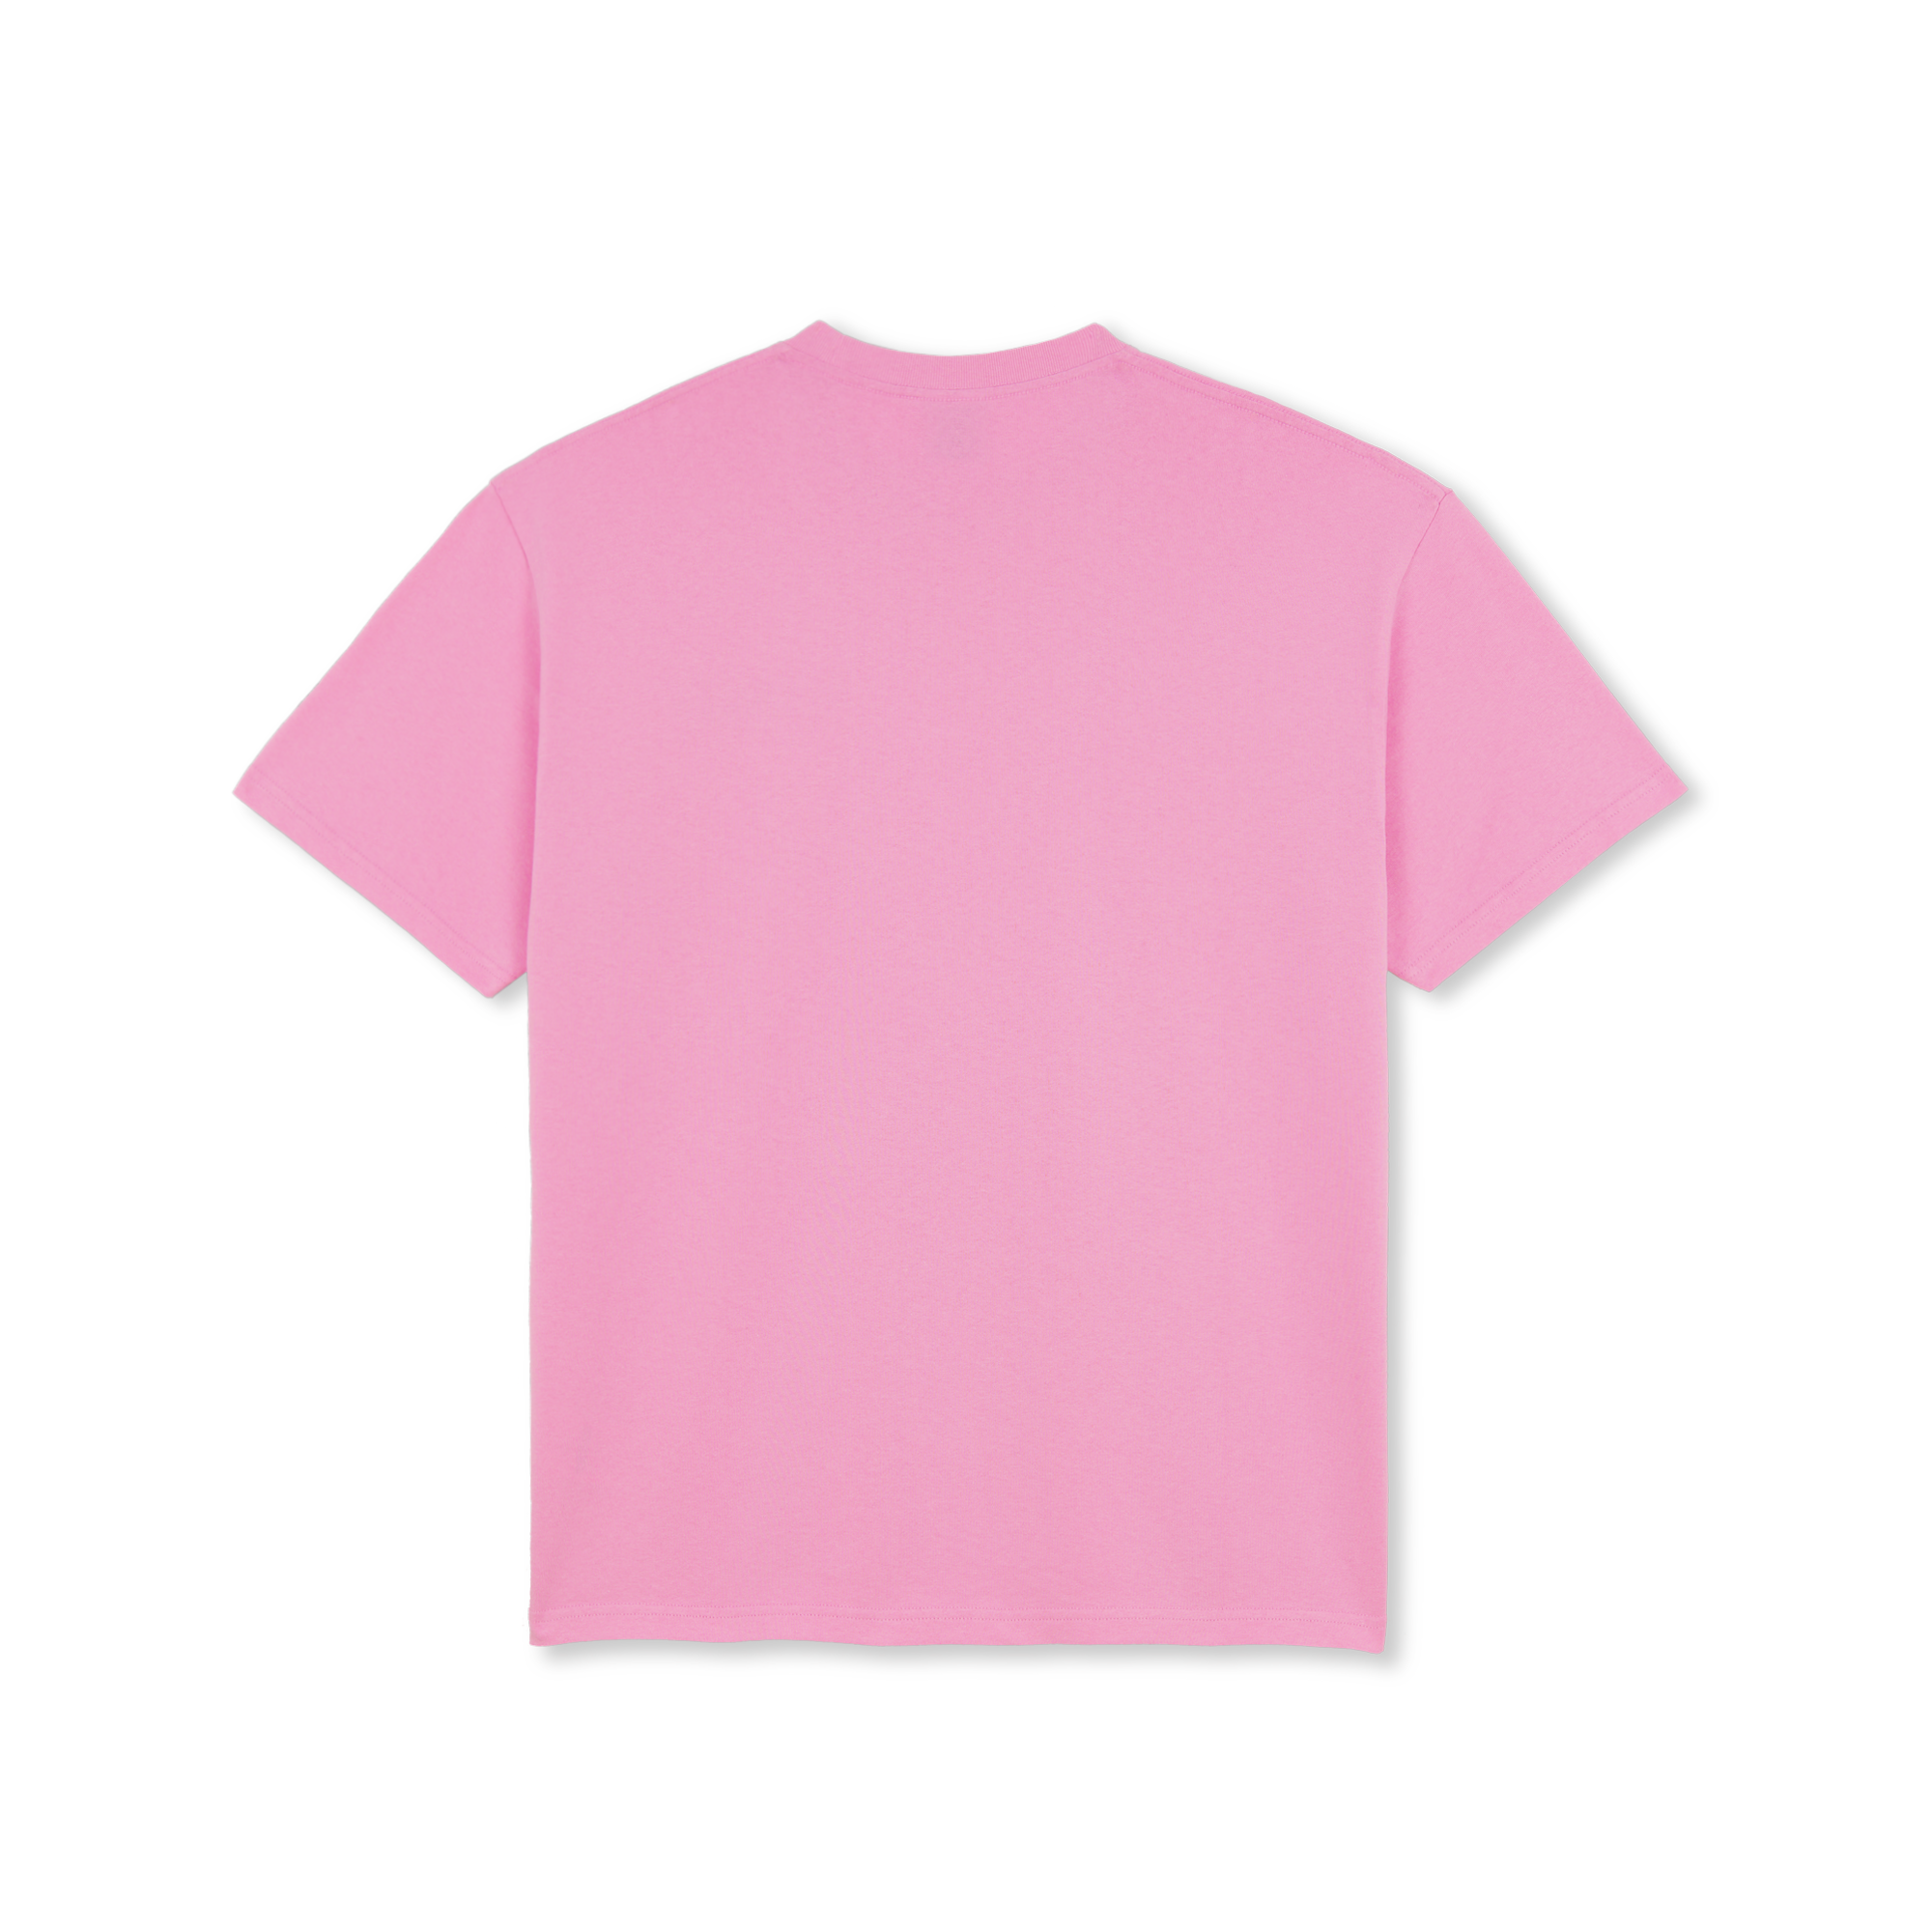 Pink polar short sleeve T-shirt with black spiderweb logo on front. Free uk shipping on orders over £50